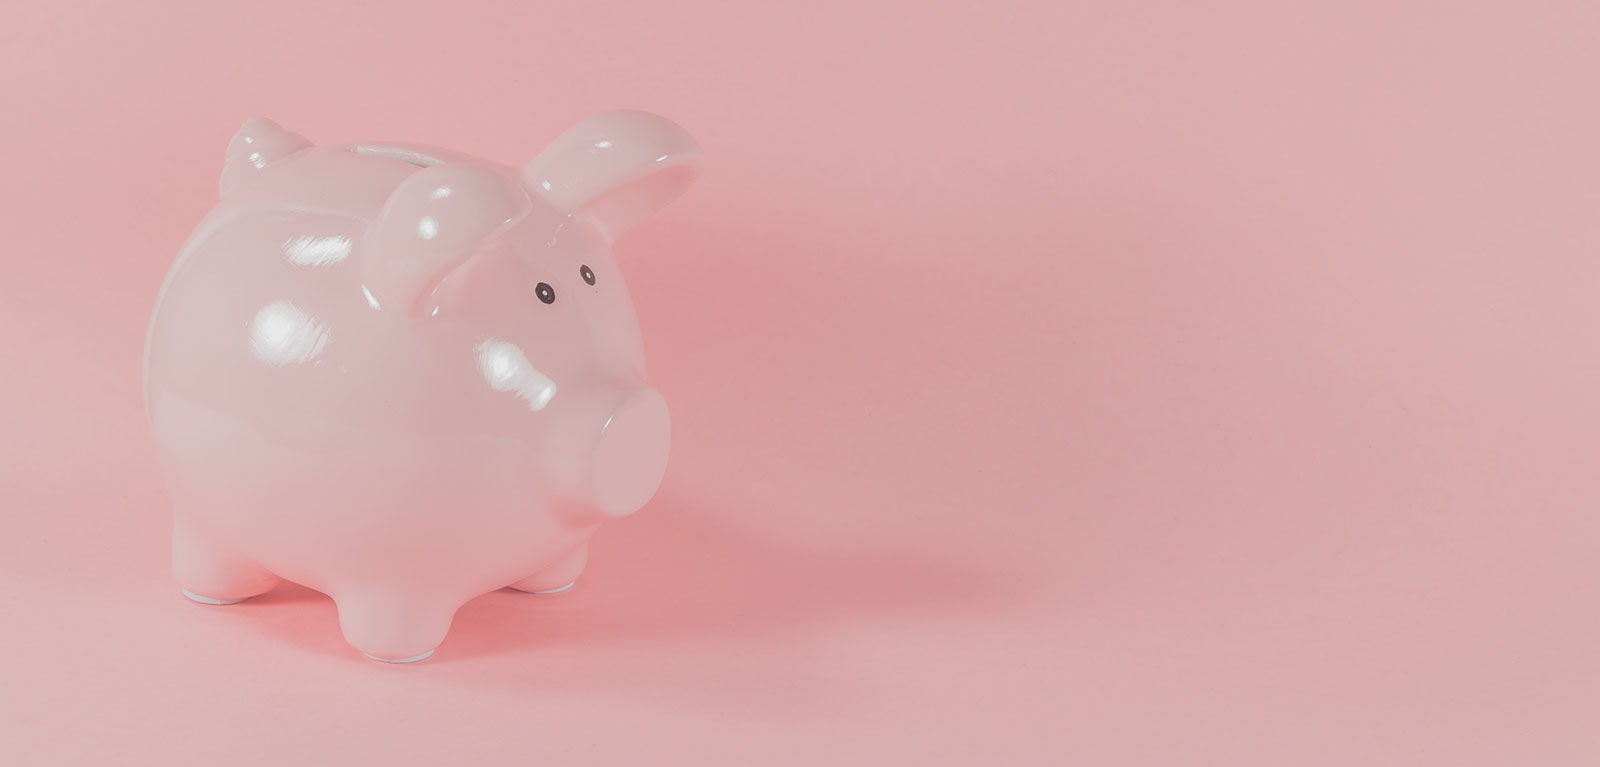 Pink piggy bank on a pink background